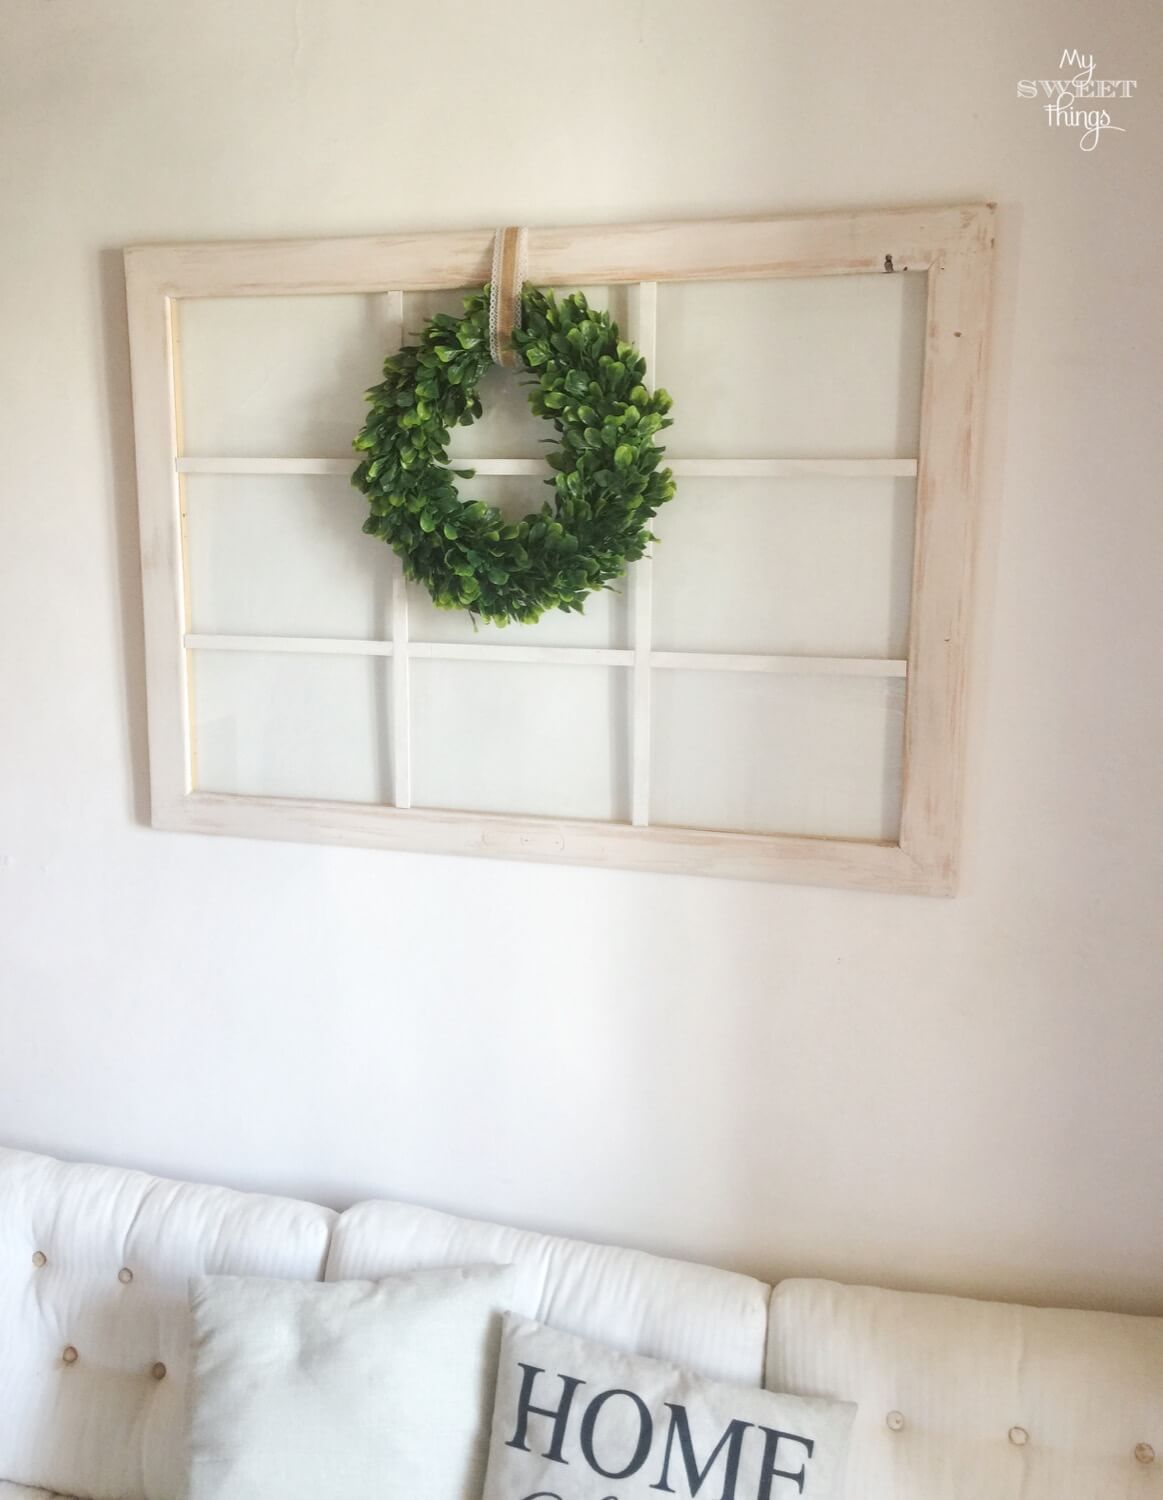 Old windows repurposed into home decor with boxwood wreath · Via www.seethings.net